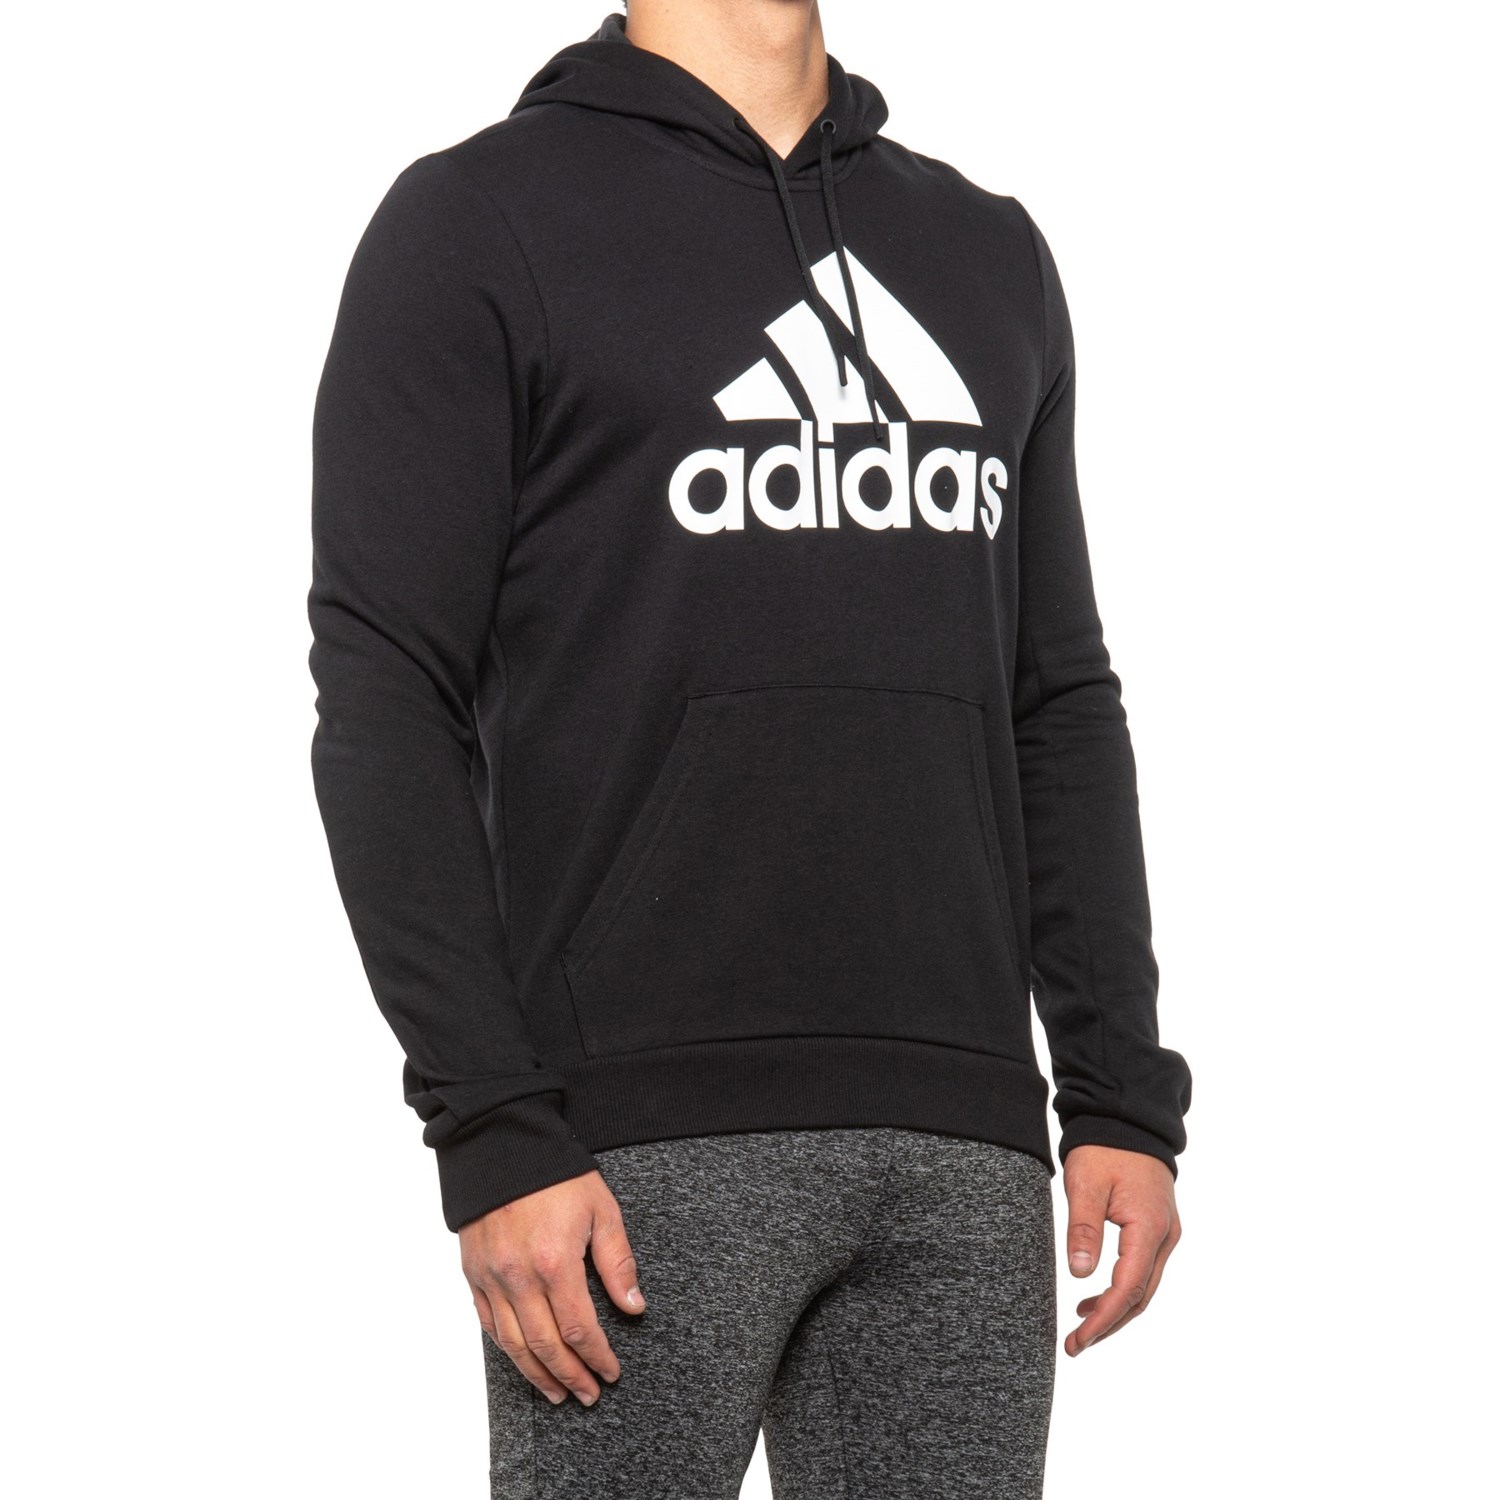 how much is a adidas hoodie